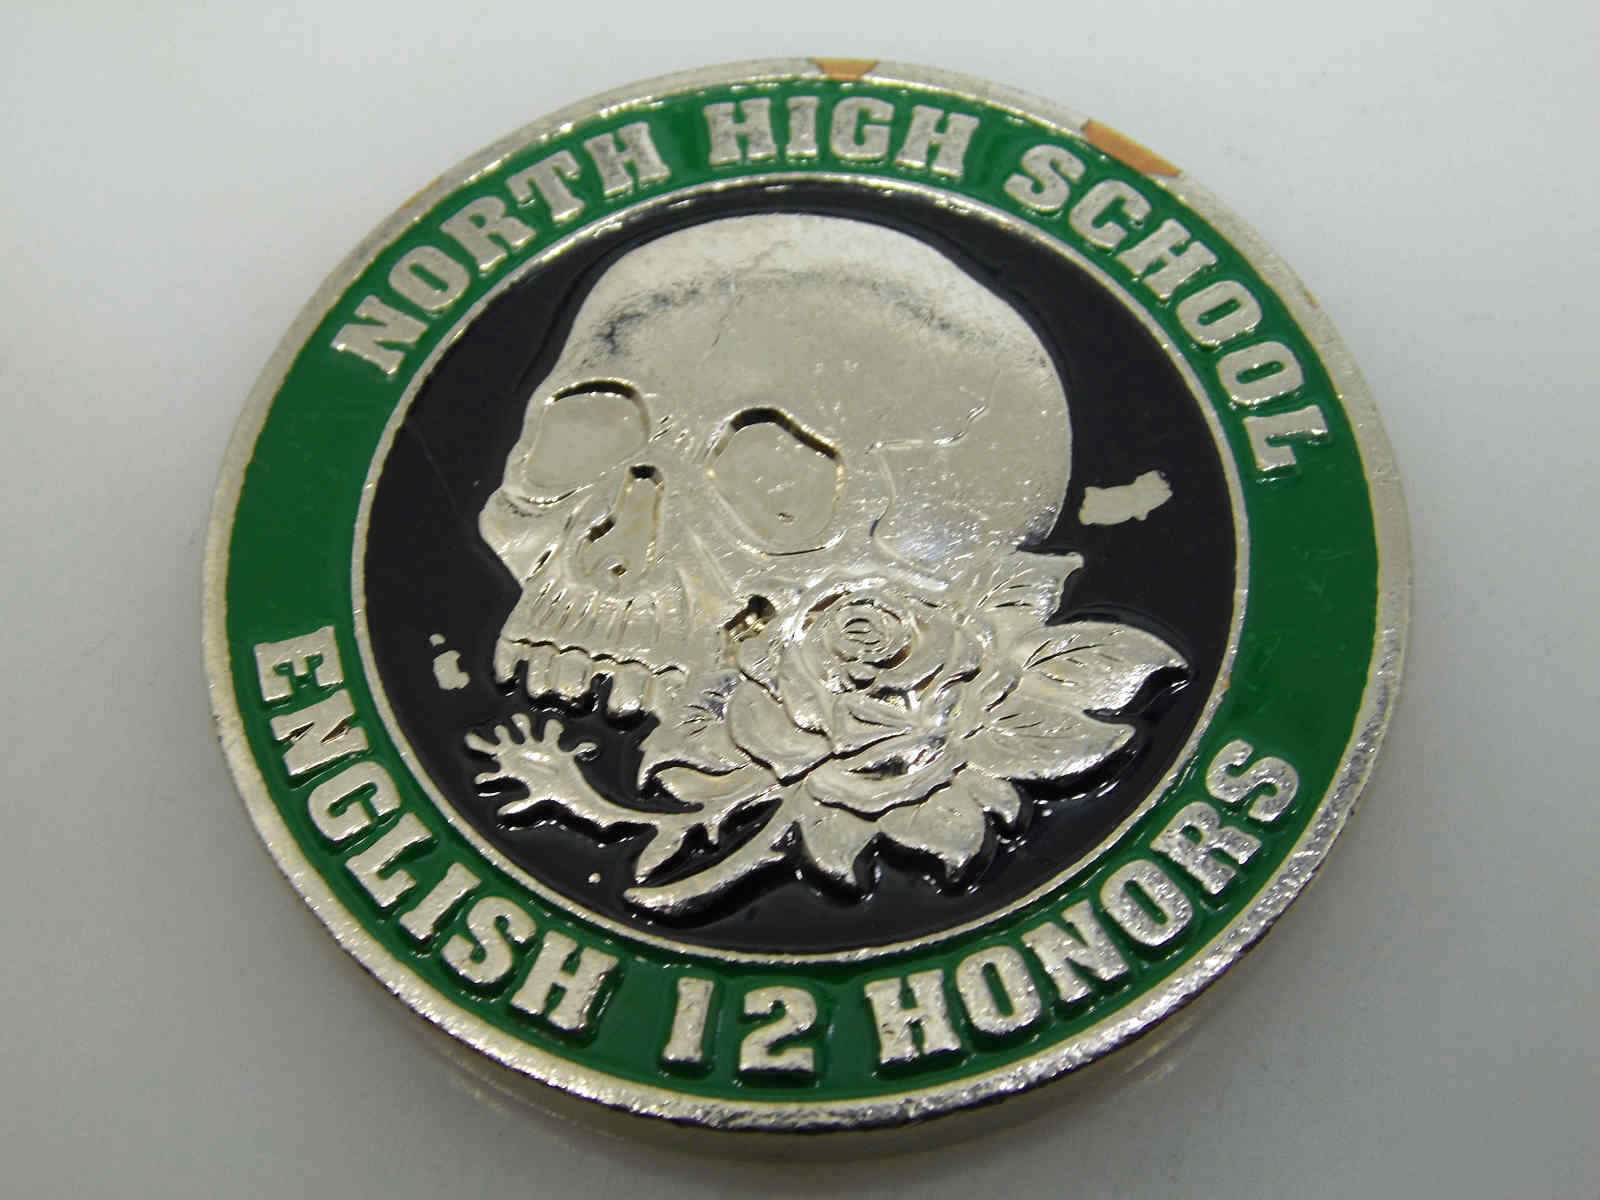 NORTH HIGH SCHOOL ENCLISH 12 HONORS CHALLENGE COIN